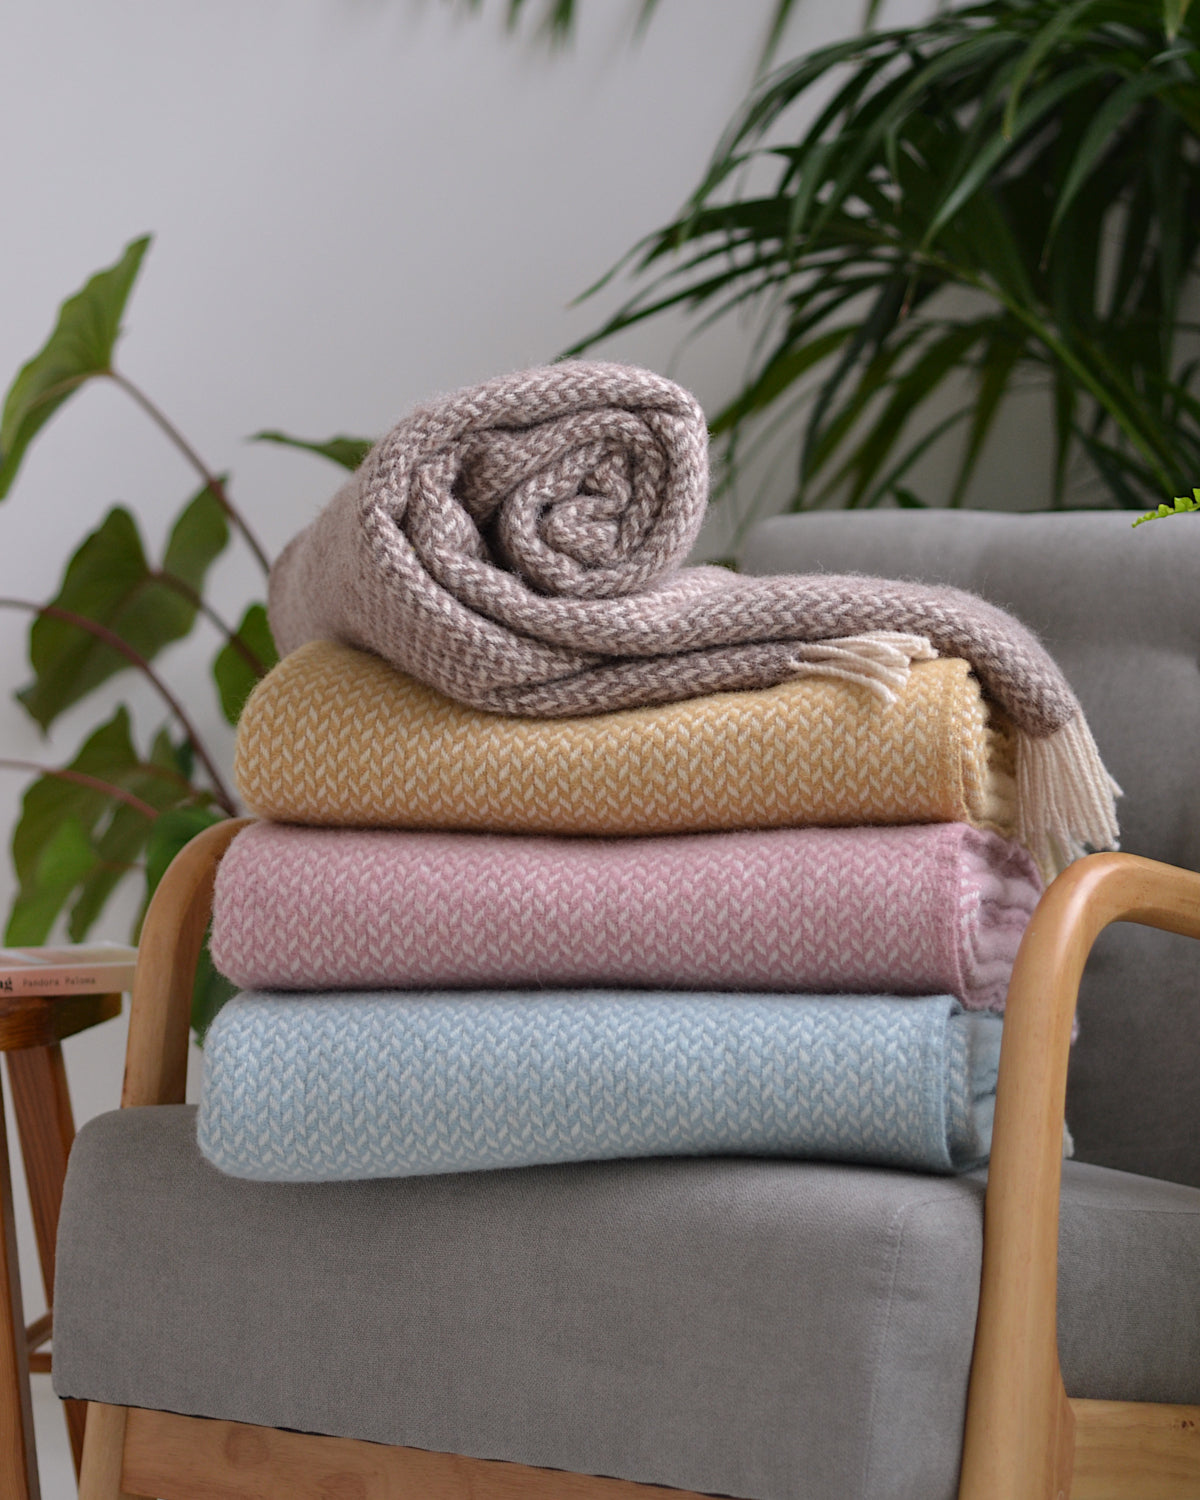 Folded wool blankets stacked on a lounge chair